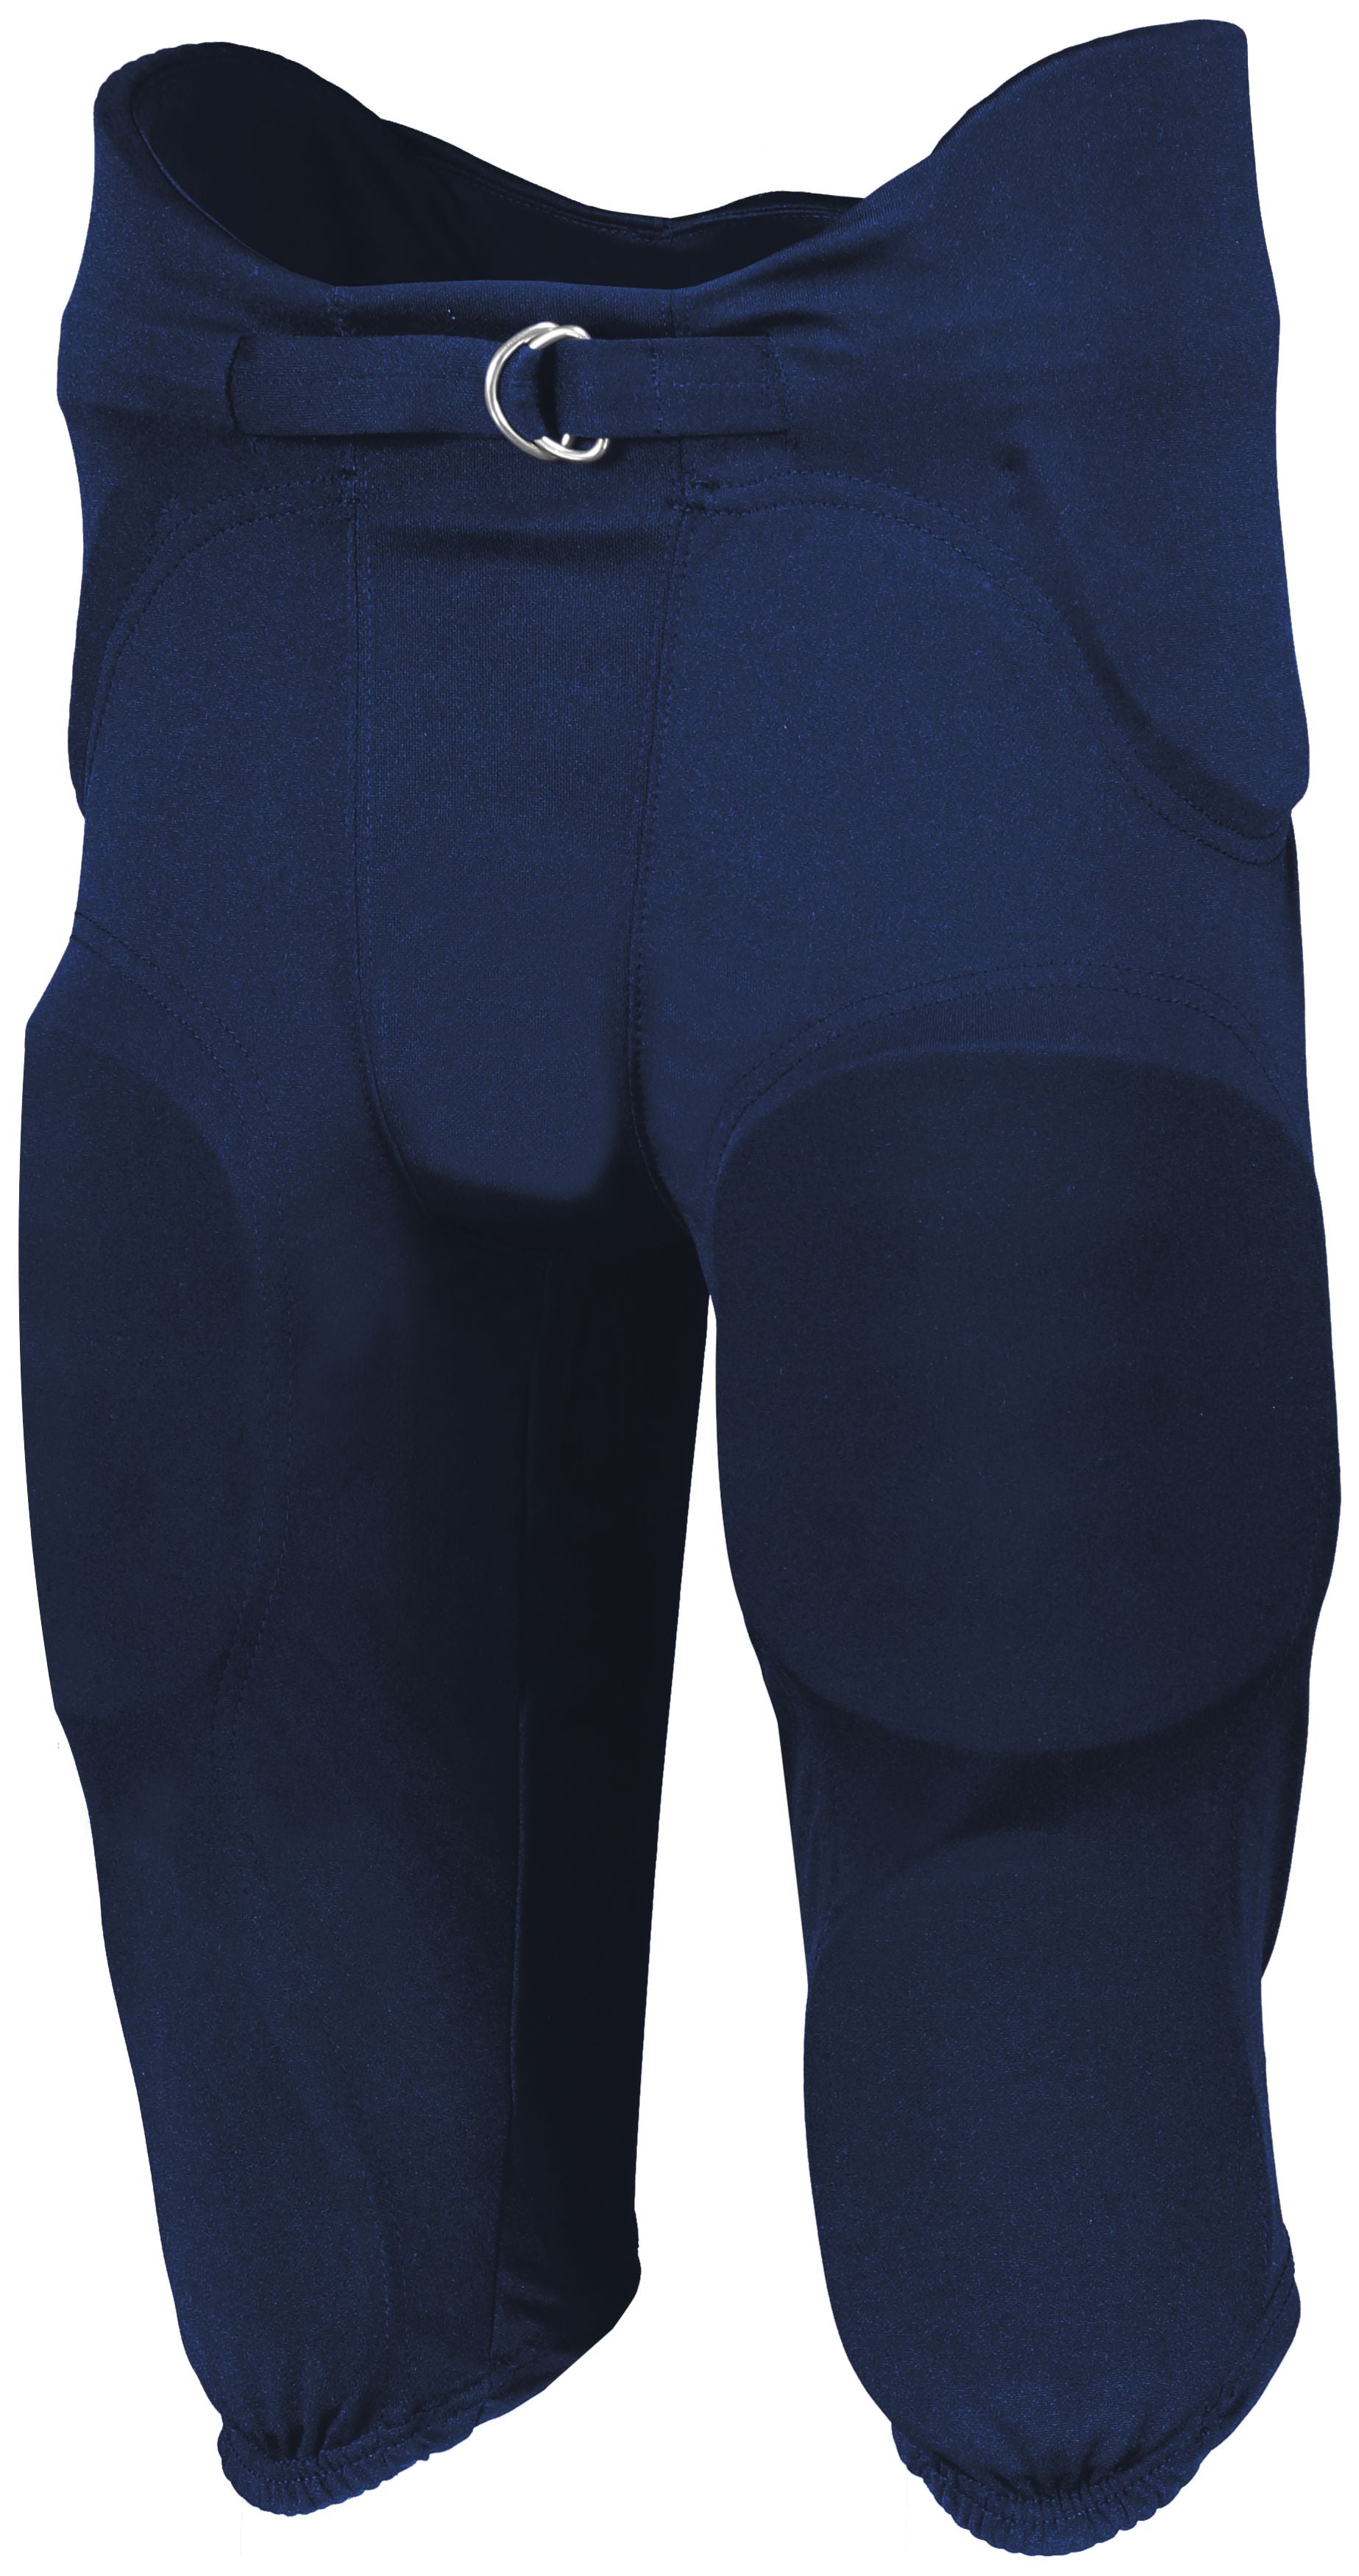 Russell Athletic Youth Integrated 7-Piece Pad Pant in Navy  -Part of the Youth, Youth-Pants, Pants, Football, Russell-Athletic-Products, All-Sports, All-Sports-1 product lines at KanaleyCreations.com